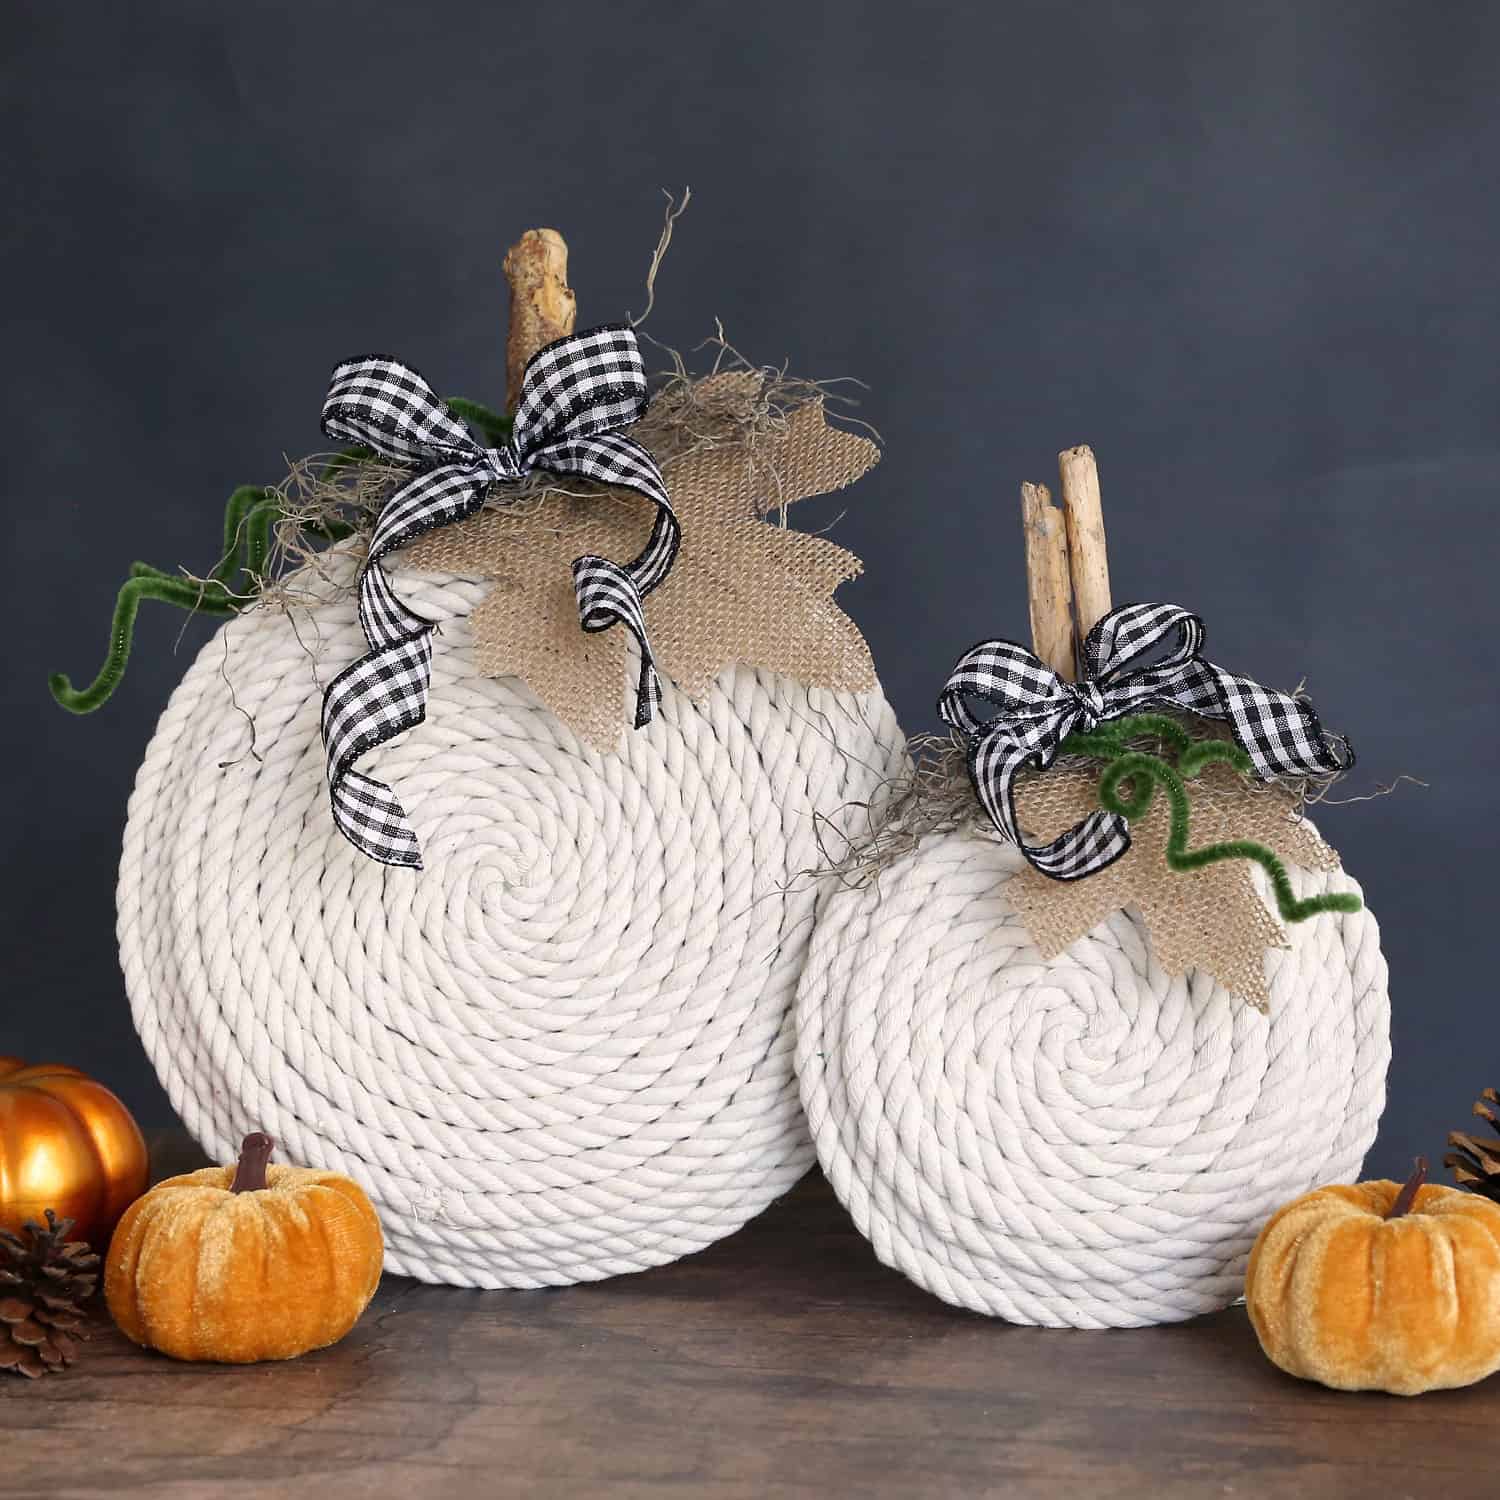 Rope formed into DIY pumpkins decorated with stems and black-and-white ribbon bows.